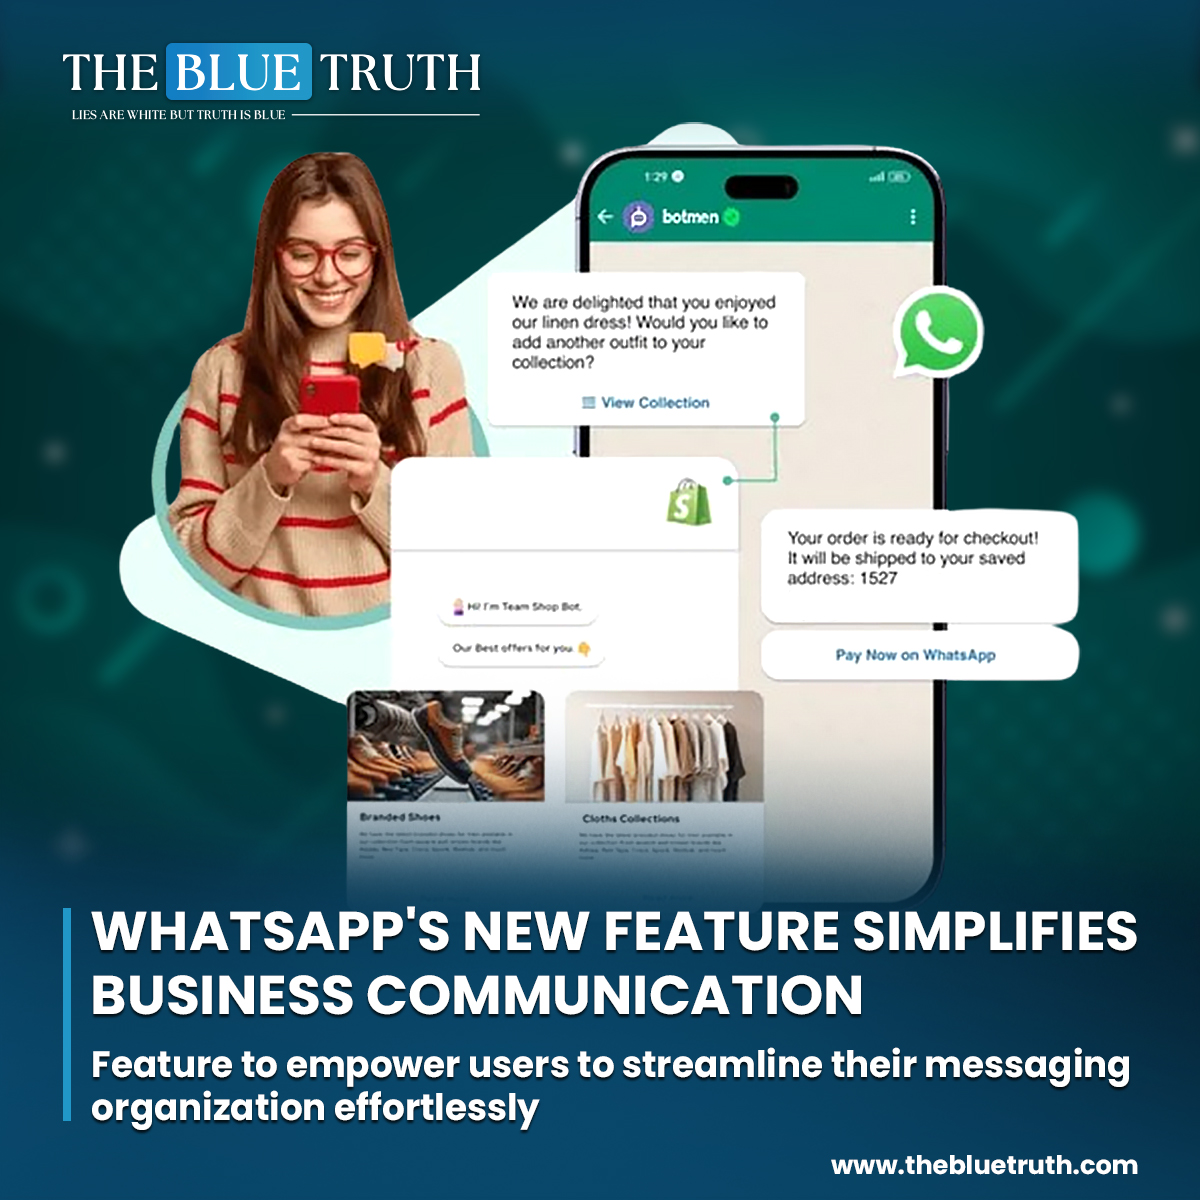 This upcoming addition promises to revolutionize the way businesses organize their conversations, reported WABetaInfo.
#WhatsApp #BusinessCommunication
#MessagingFeature #MessagingOrganization
#EffortlessCommunication #UserEmpowerment
#ProductivityTool #tbt #thebluetruth